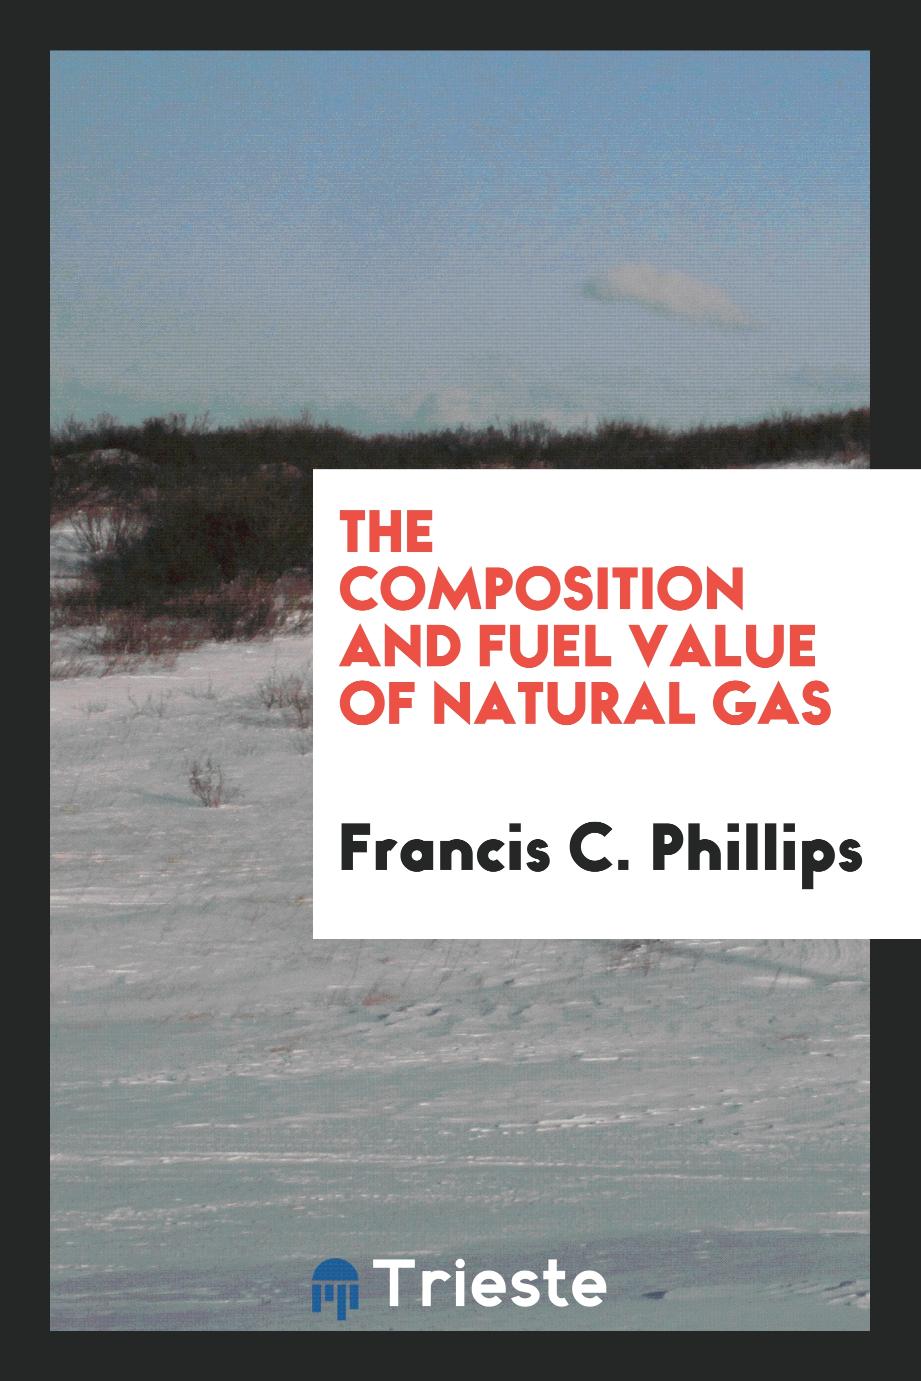 The composition and fuel value of natural gas